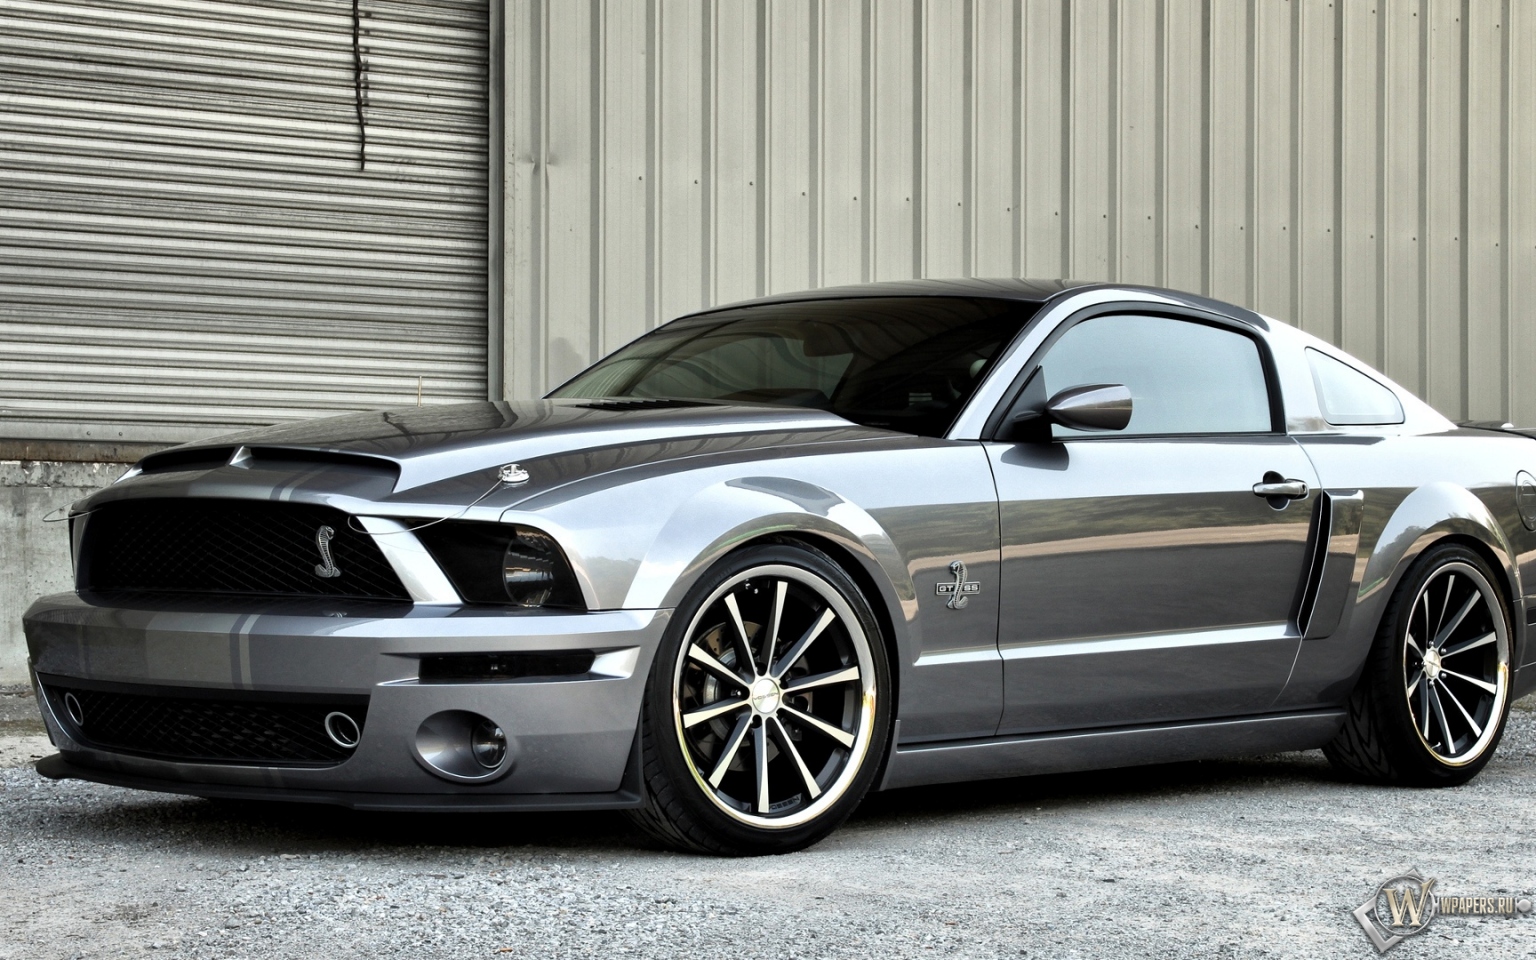 Ford Mustang Shelby GT500 1536x960